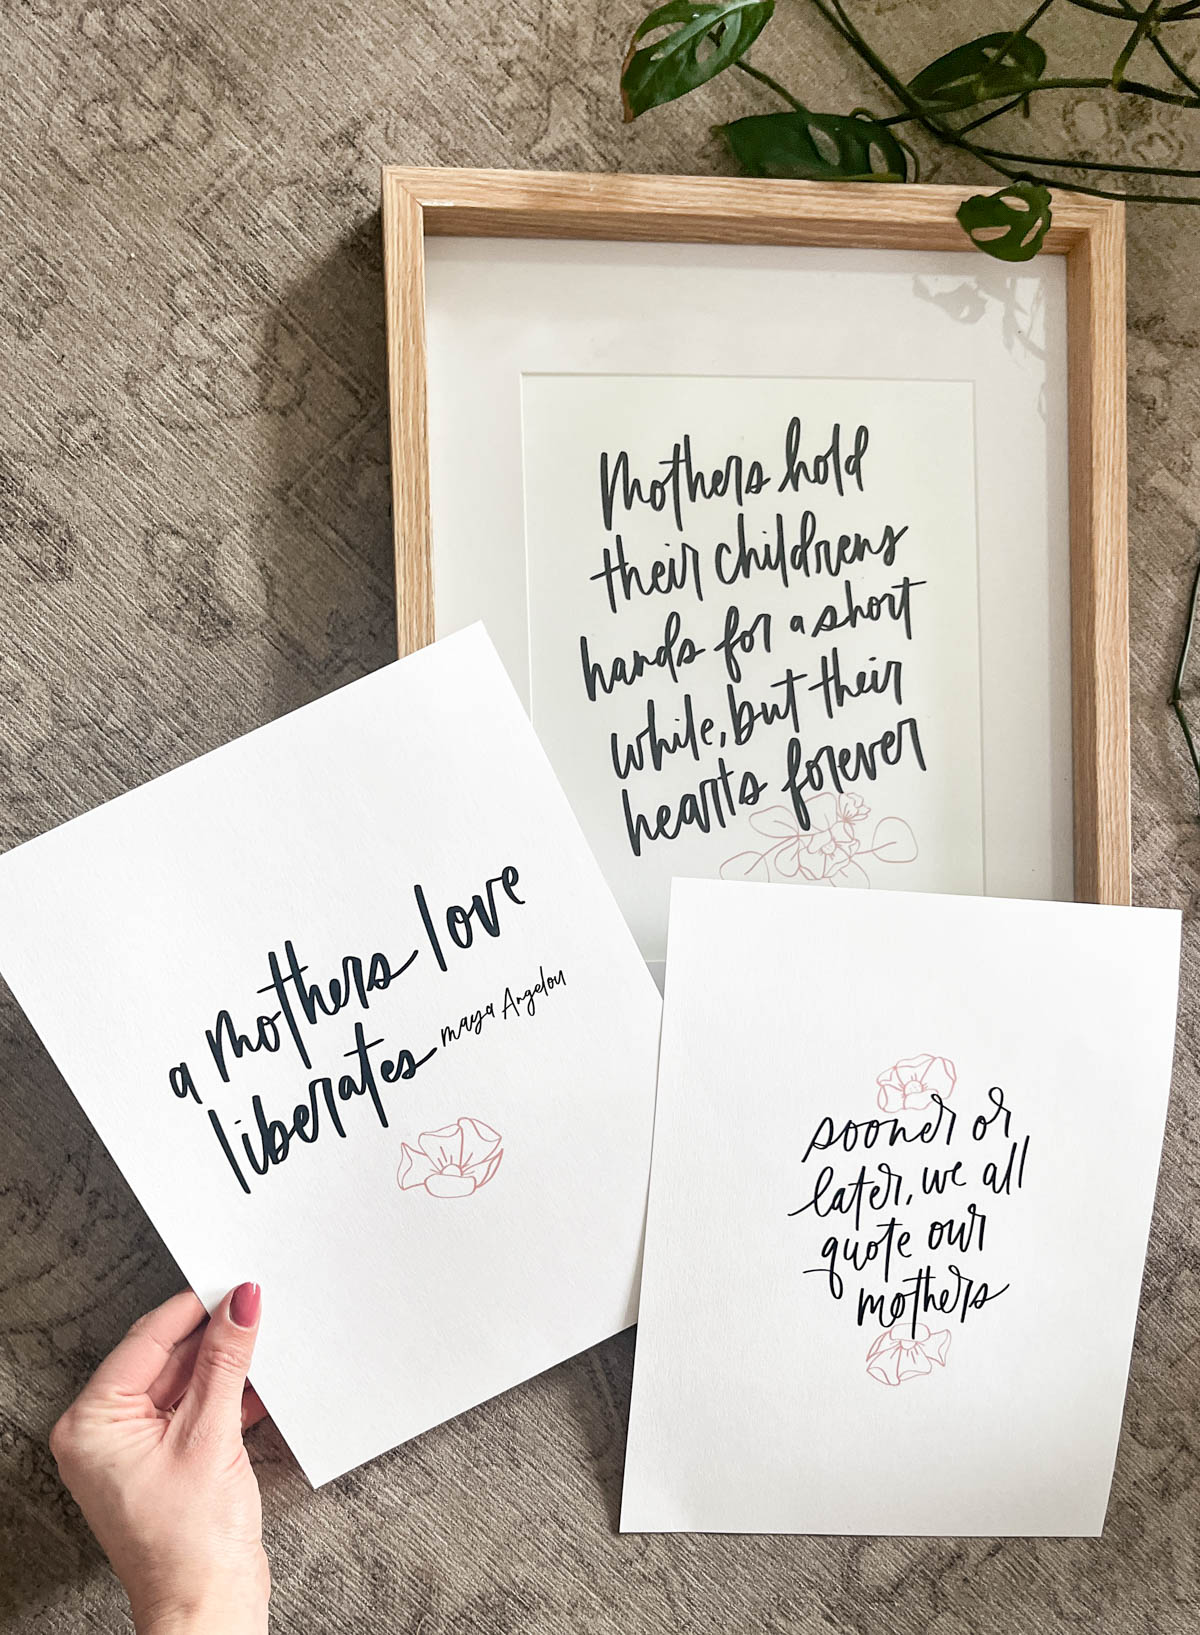 Three free printable quotes for mothers day, printed with one framed. All hand lettered with black writing and a pink accent line floral